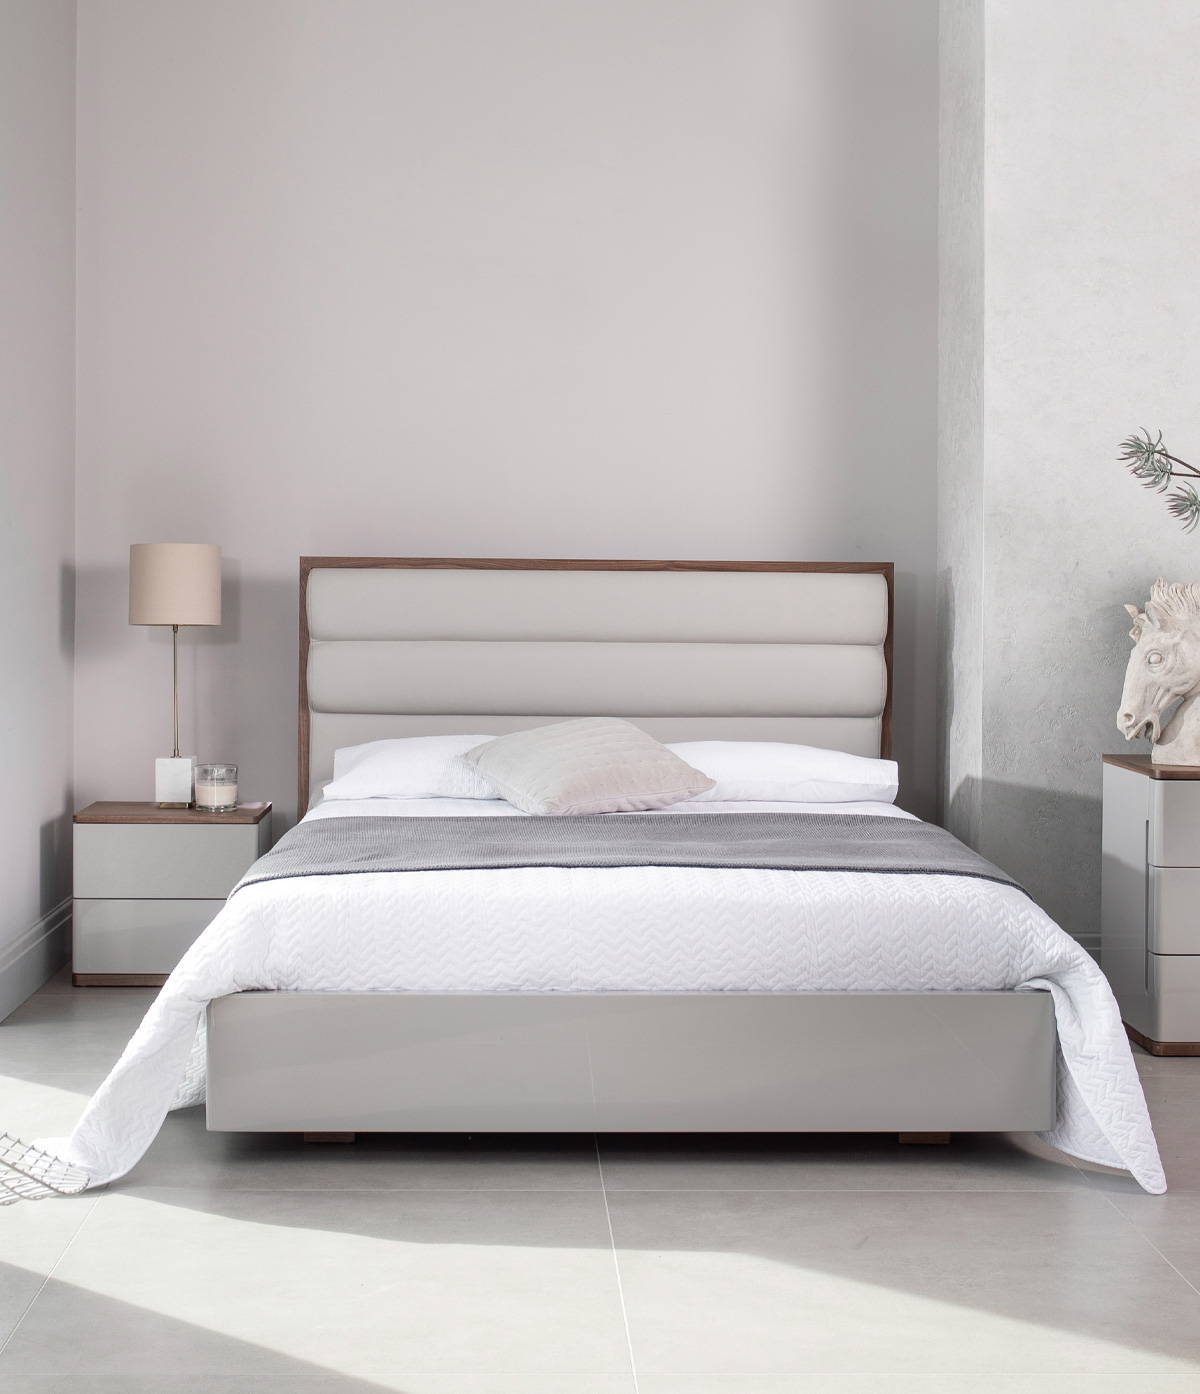 Crofton Park Bedroom Collection - White Painted Bedroom Contemporary Collection